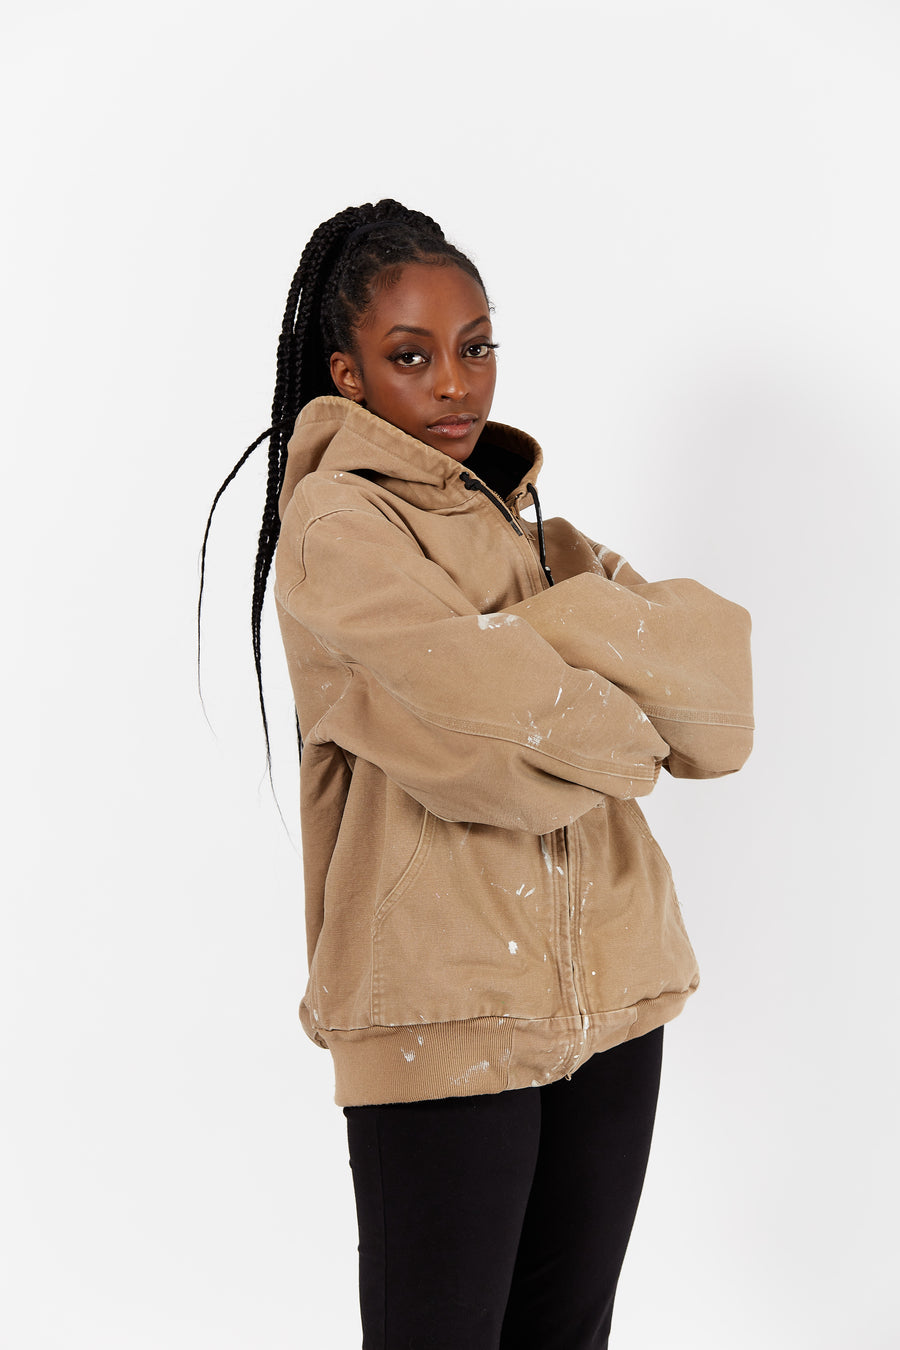 Vintage Carhartt Distressed Hooded Jacket in a vintage style from thrift store Twise Studio